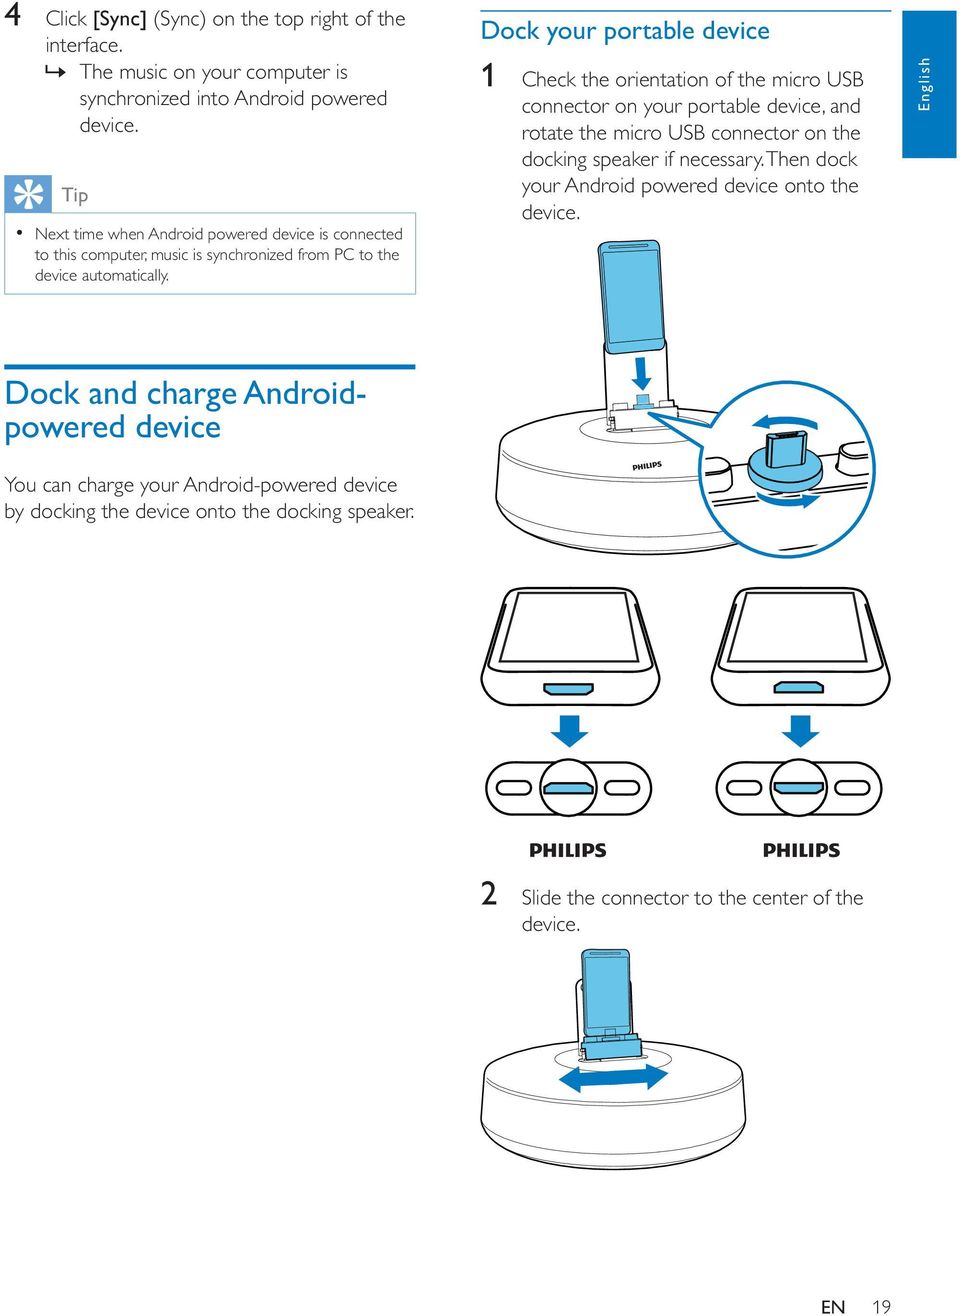 Dock your portable device 1 Check the orientation of the micro USB connector on your portable device, and rotate the micro USB connector on the docking speaker if